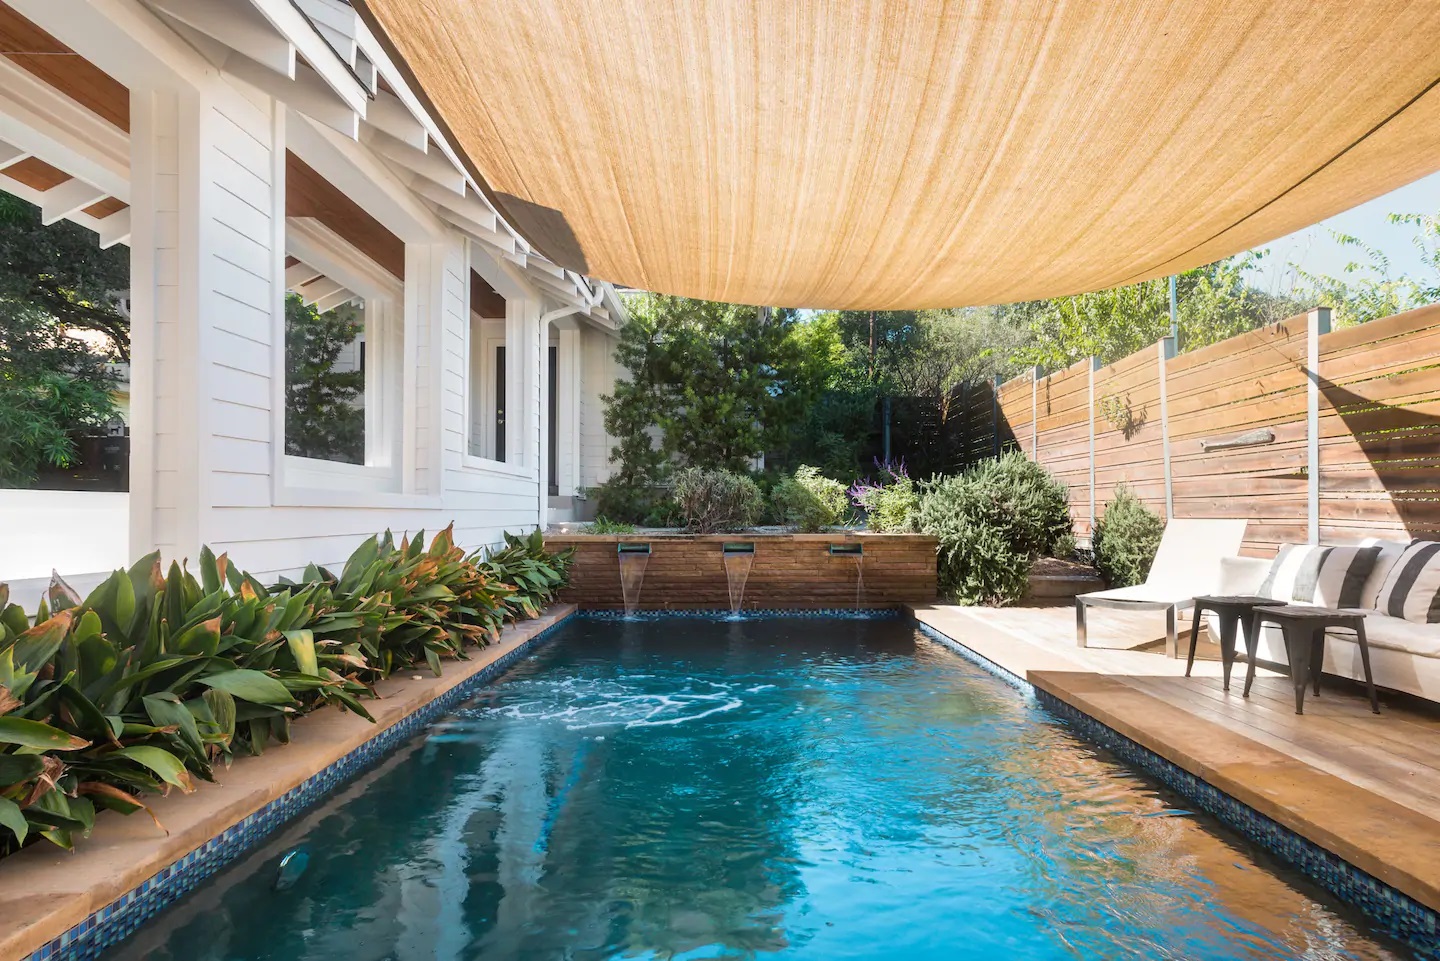 Photo of a sparkling pool and seating area at an Airbnb in Texas. 